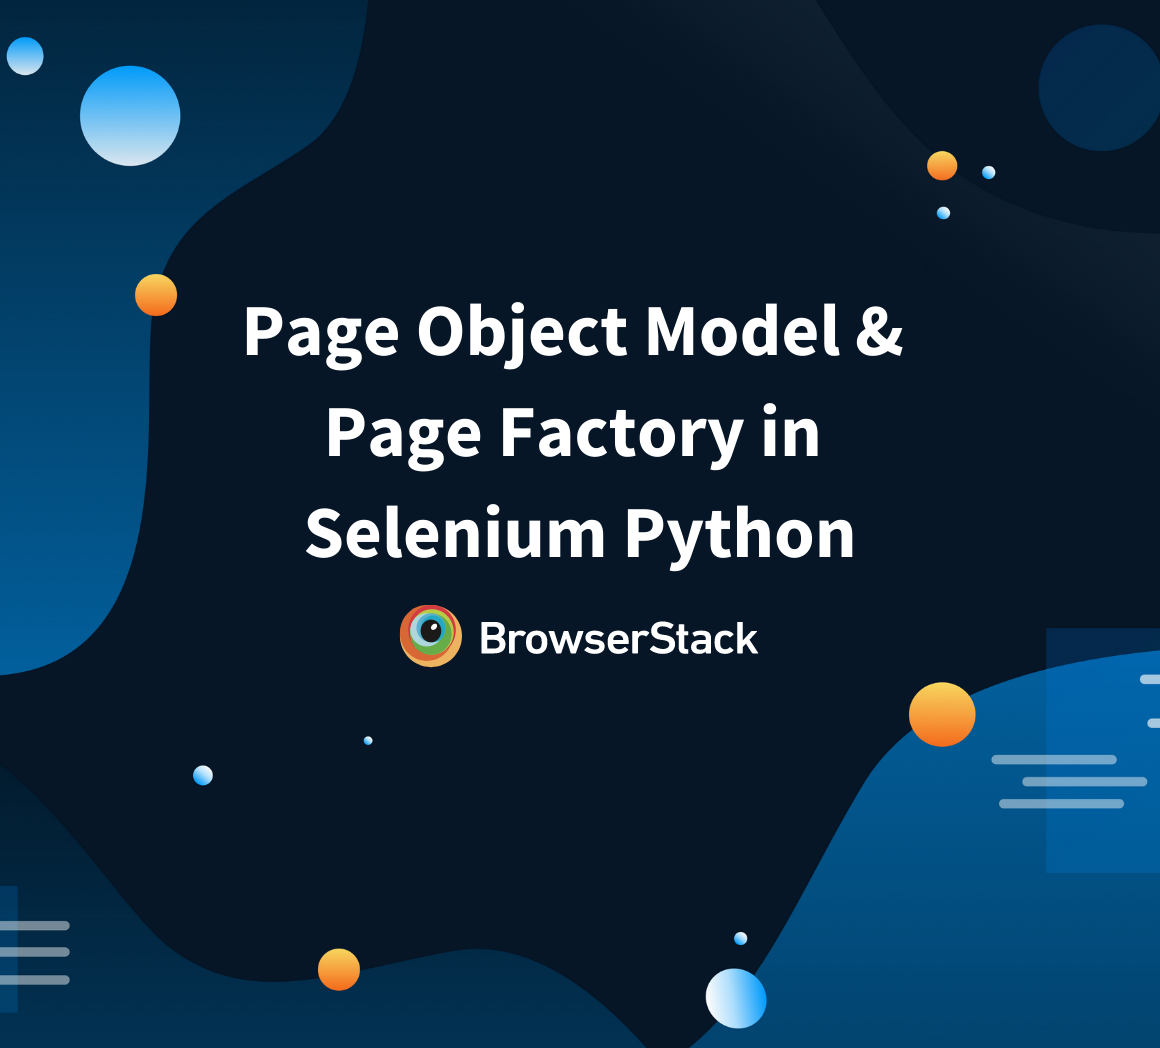 Page Object Model and Page Factory in Selenium Python